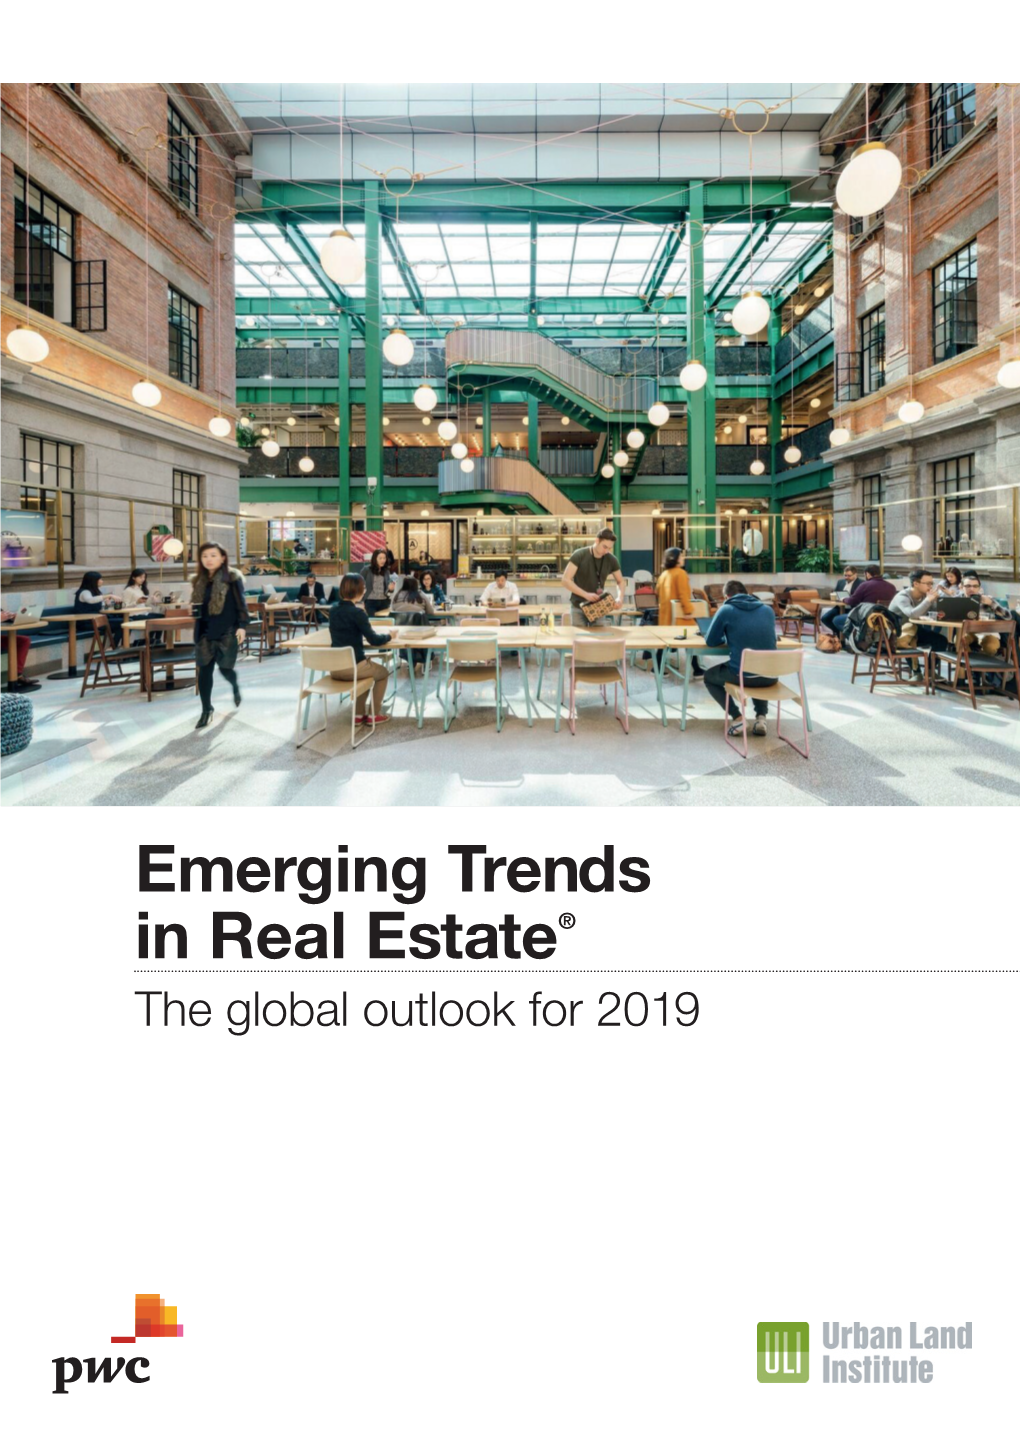 Emerging Trends in Real Estate the Global Outlook for 2019